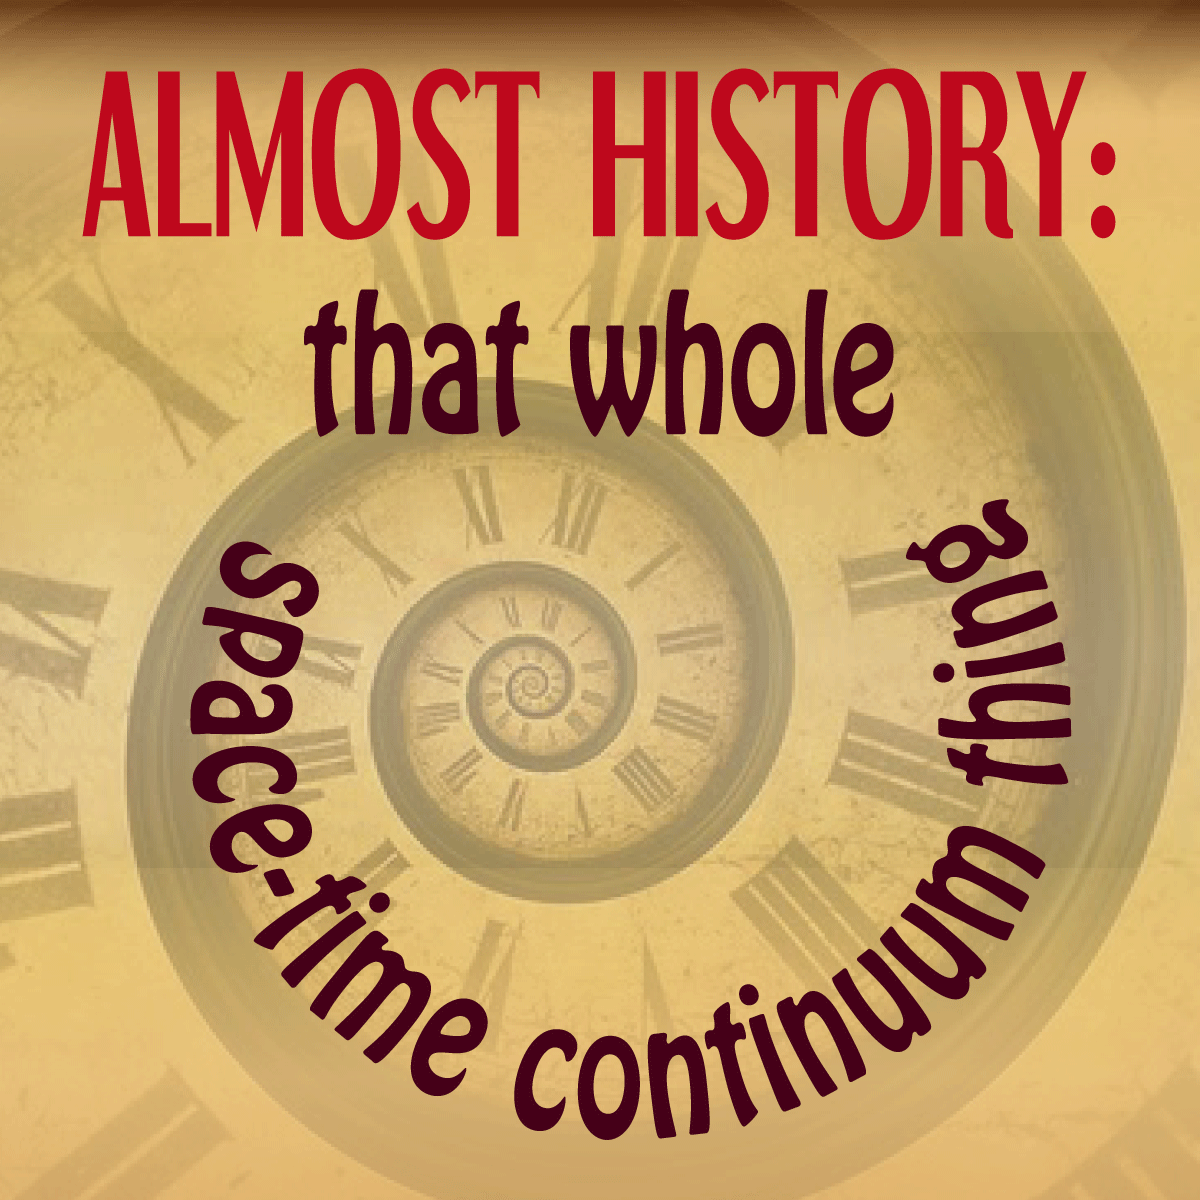 Almost History: that whole space time continuum thing